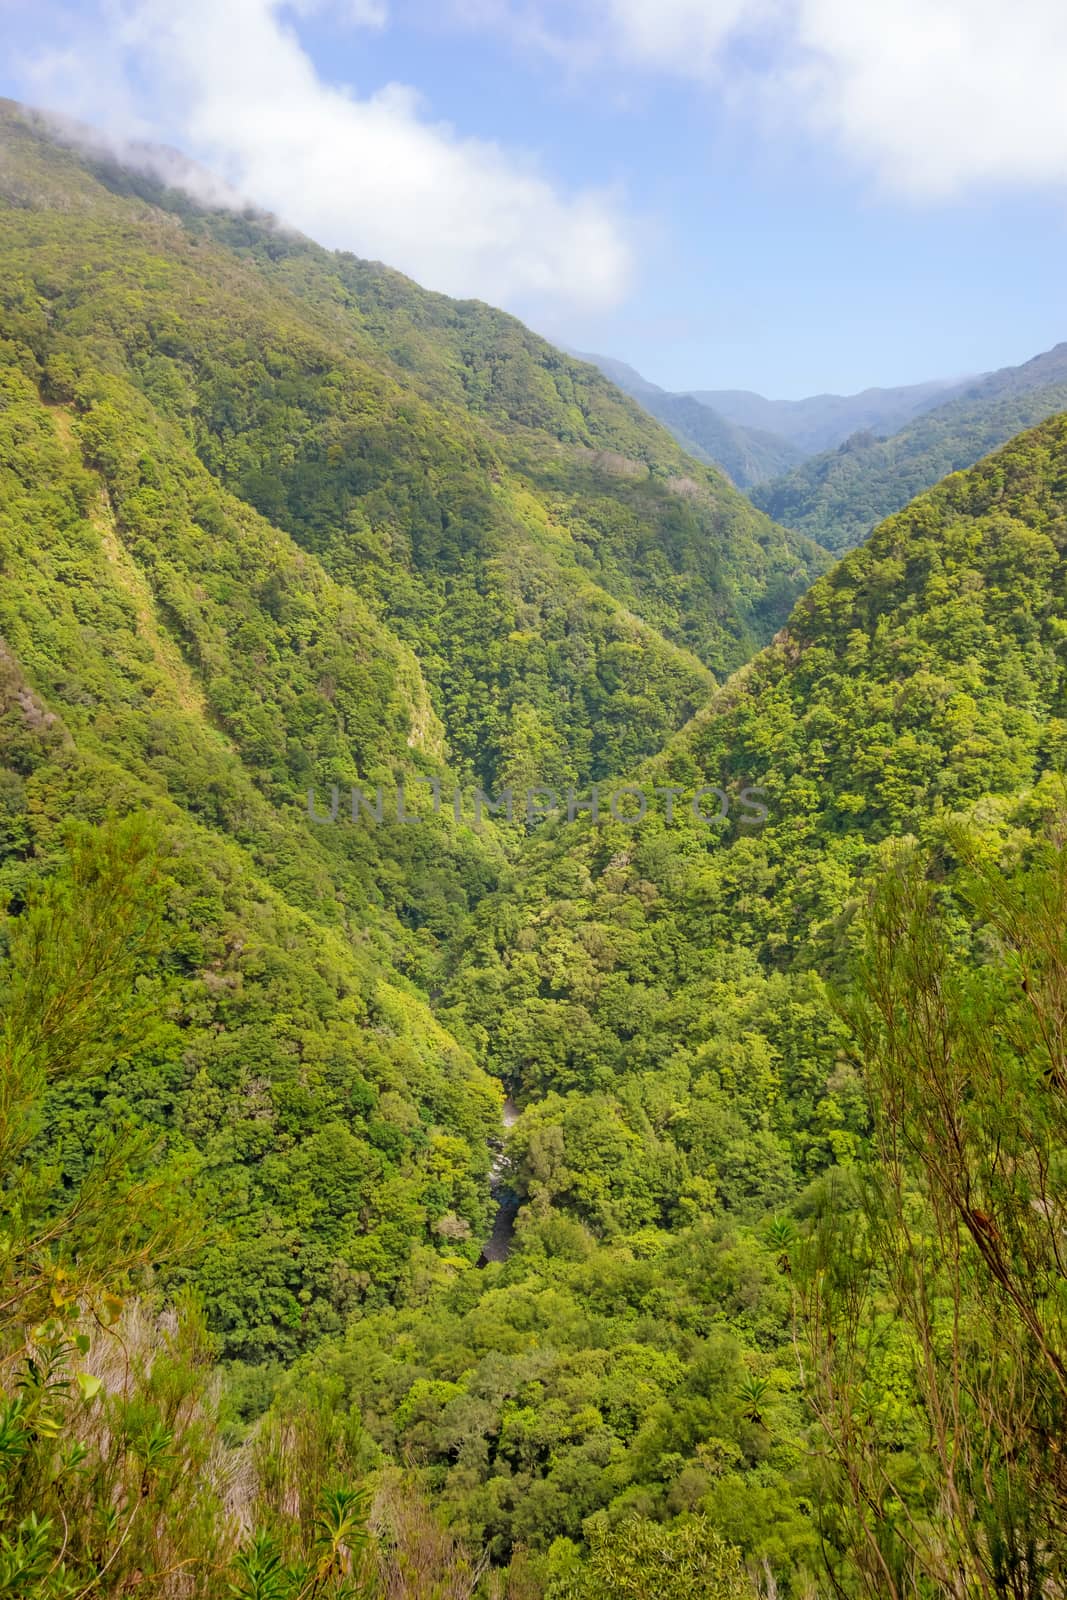 Trees in natural tropical environment - jungle valley